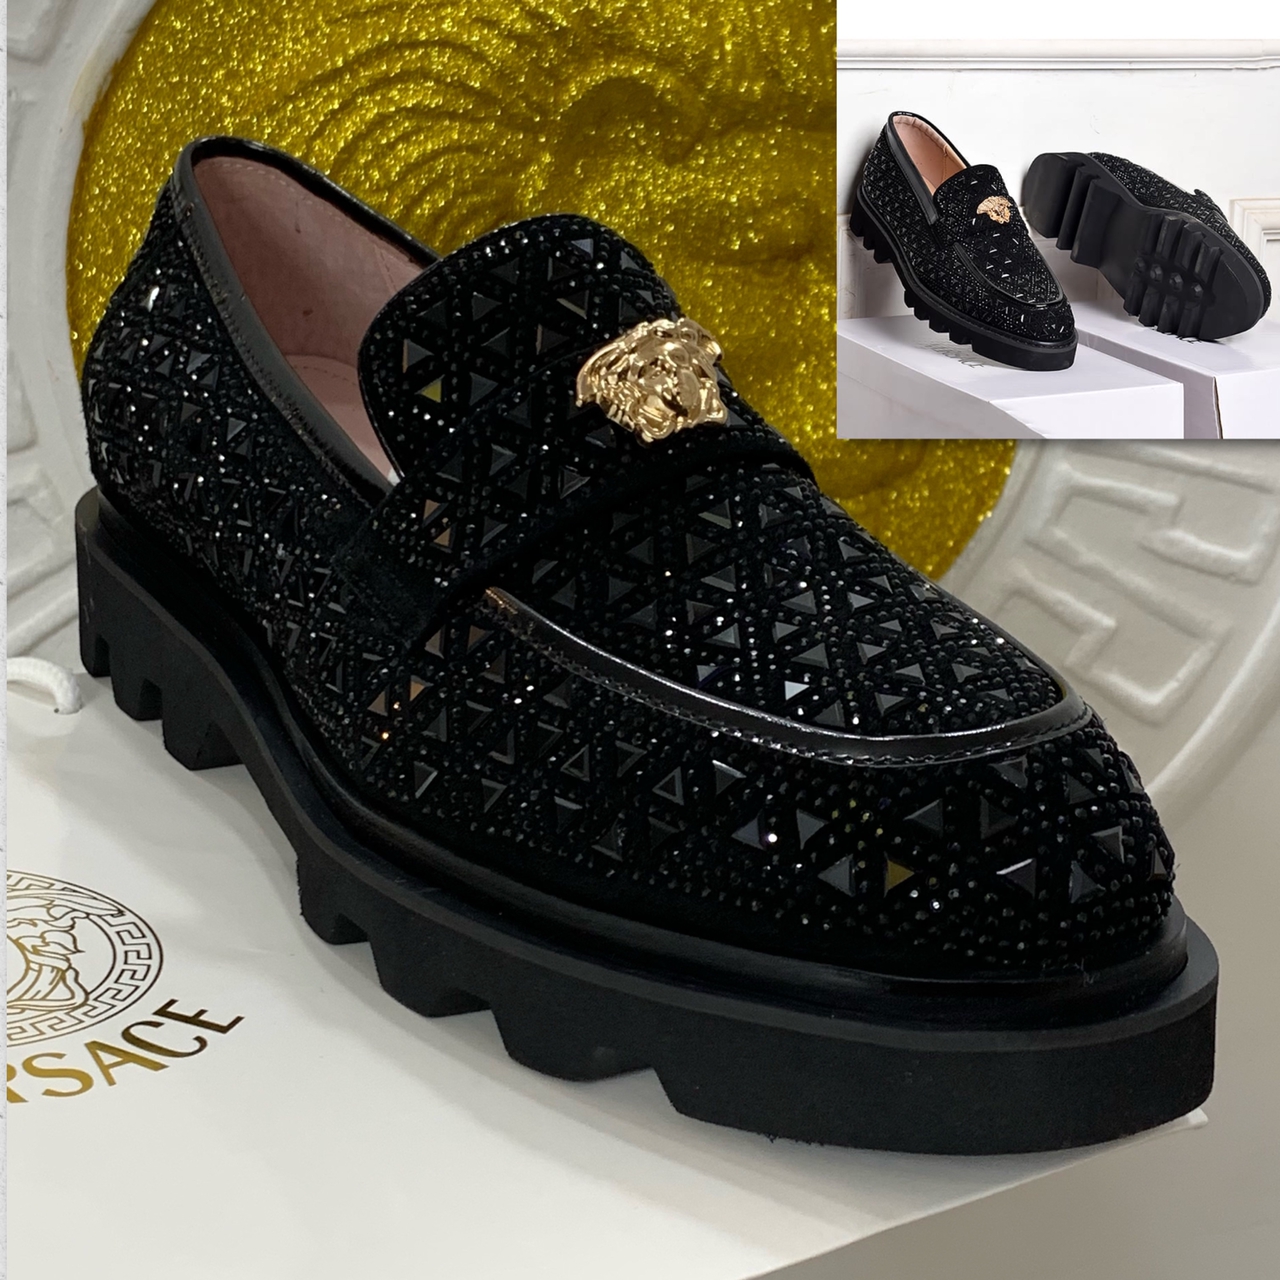 EXECUTIVE STONE STUDDED QUALITY LOAFERS